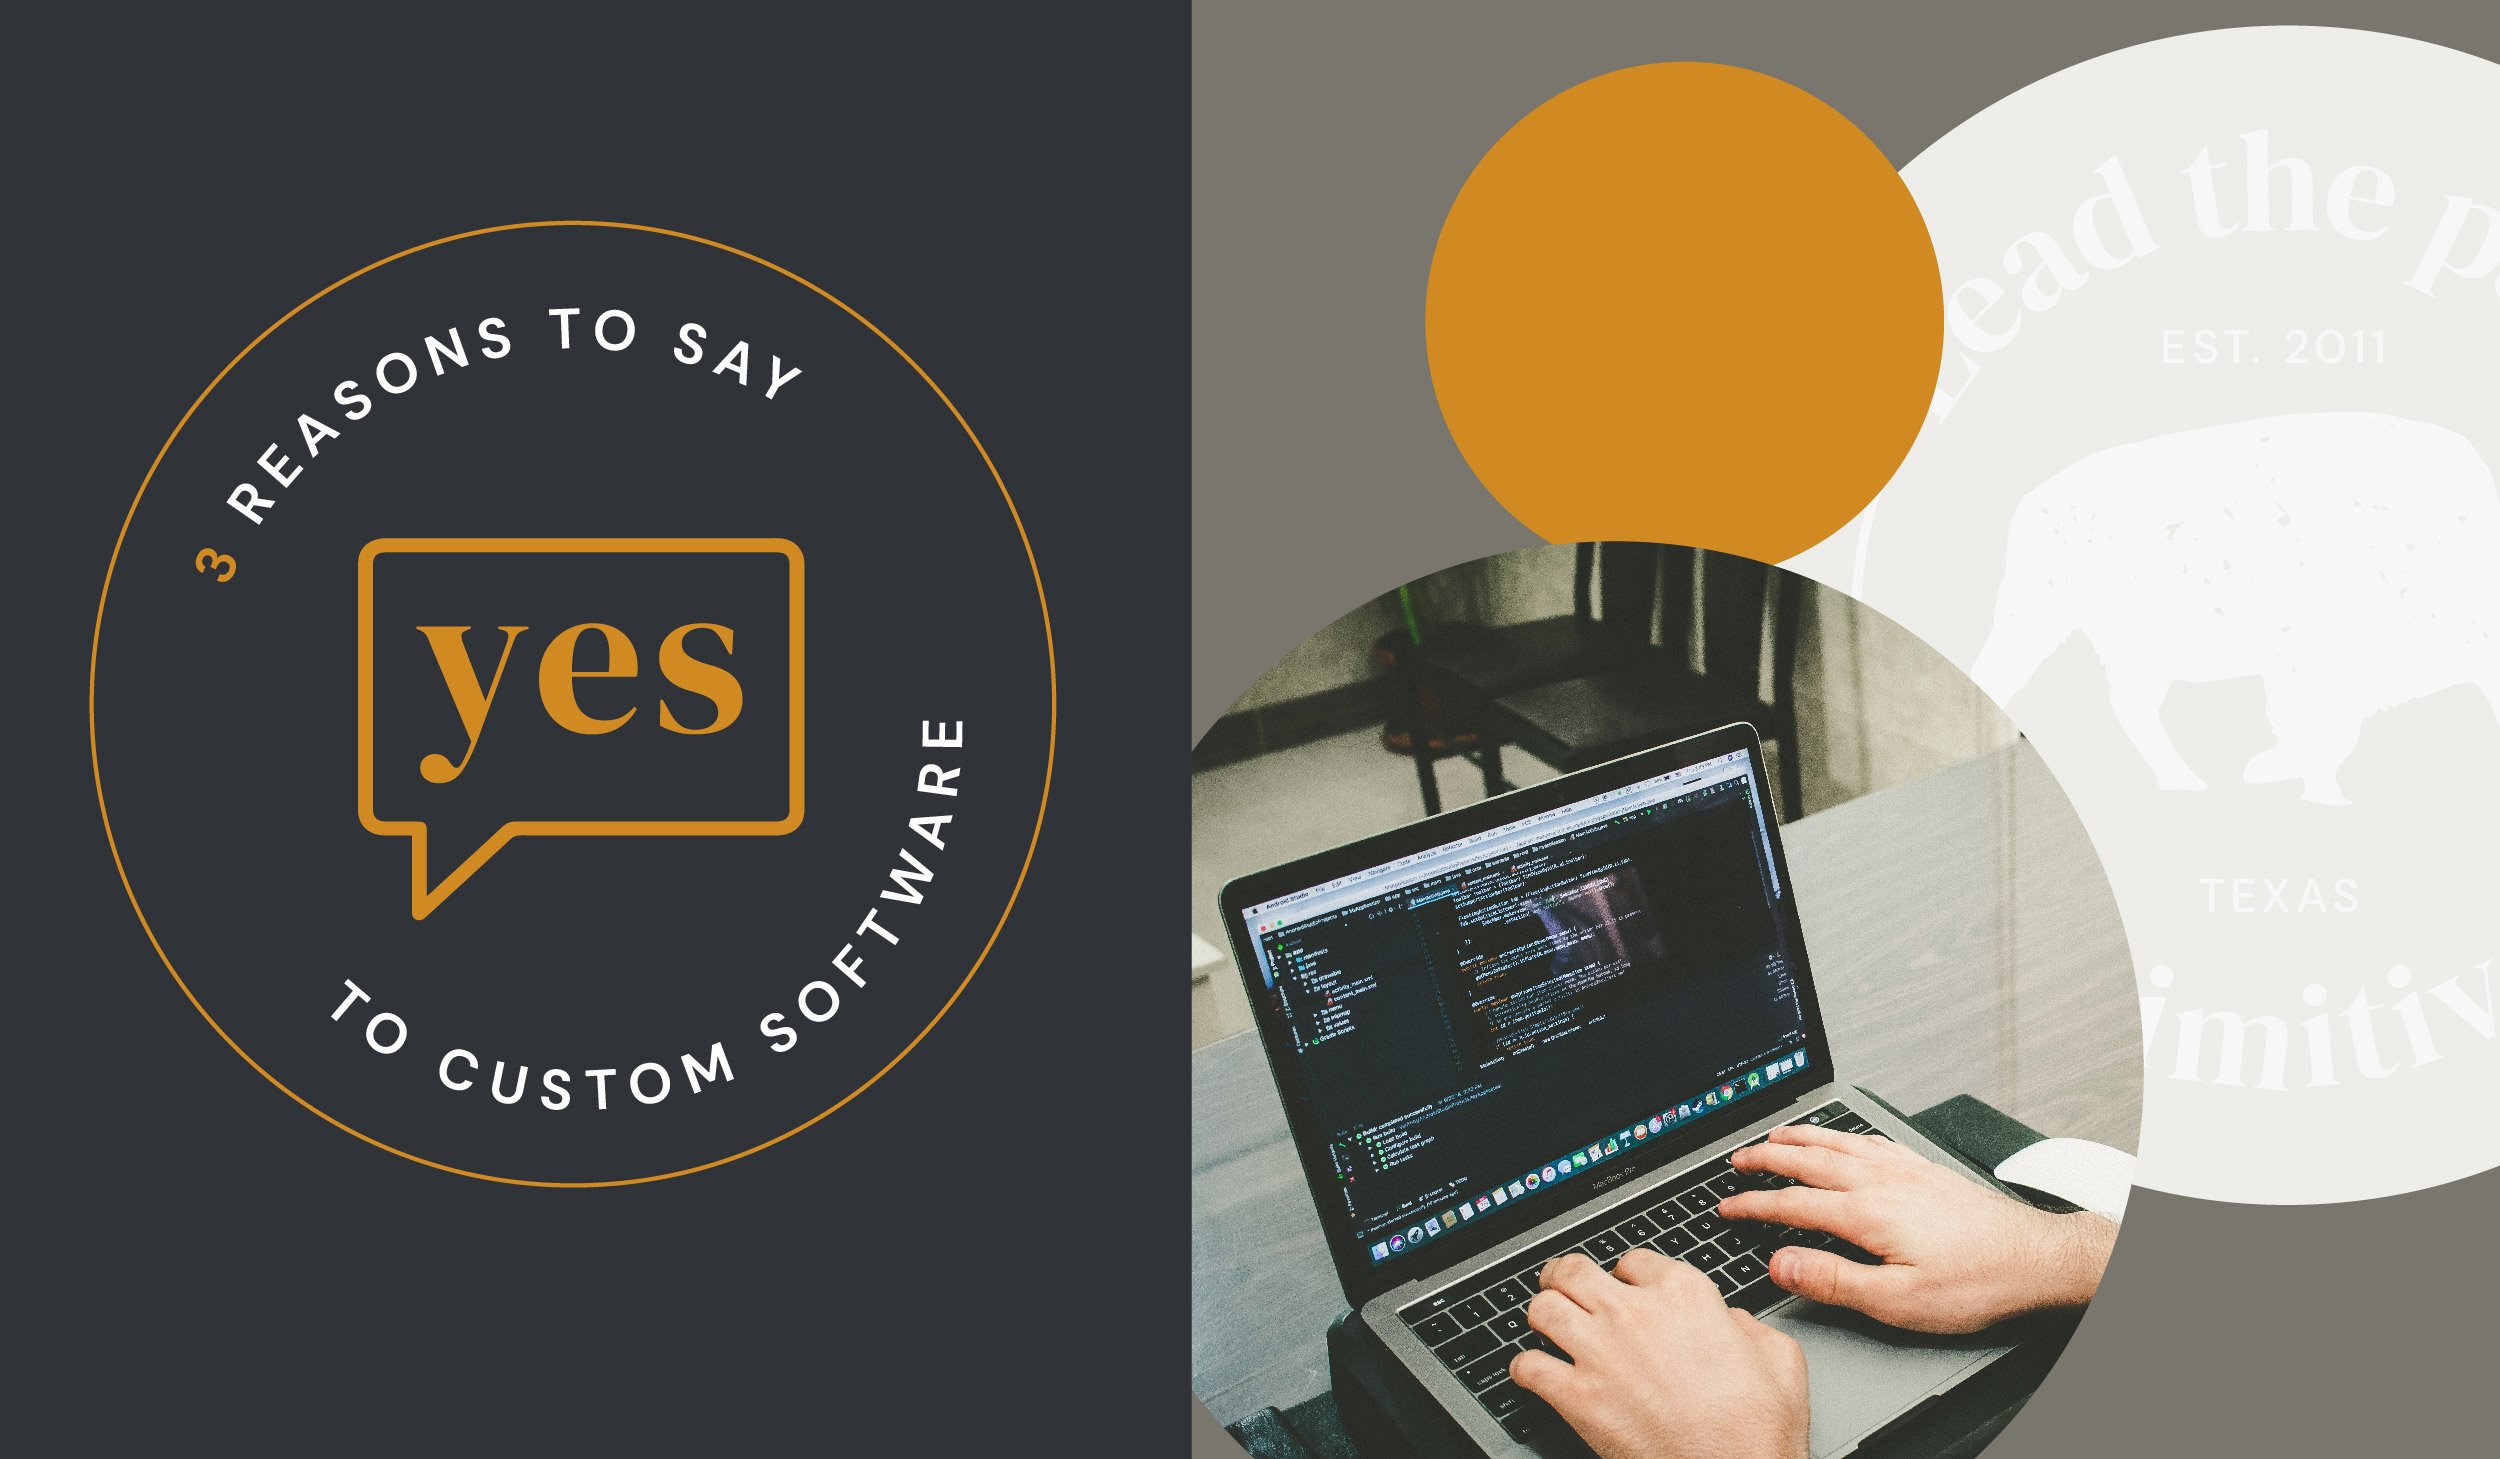 Say yes to custom software